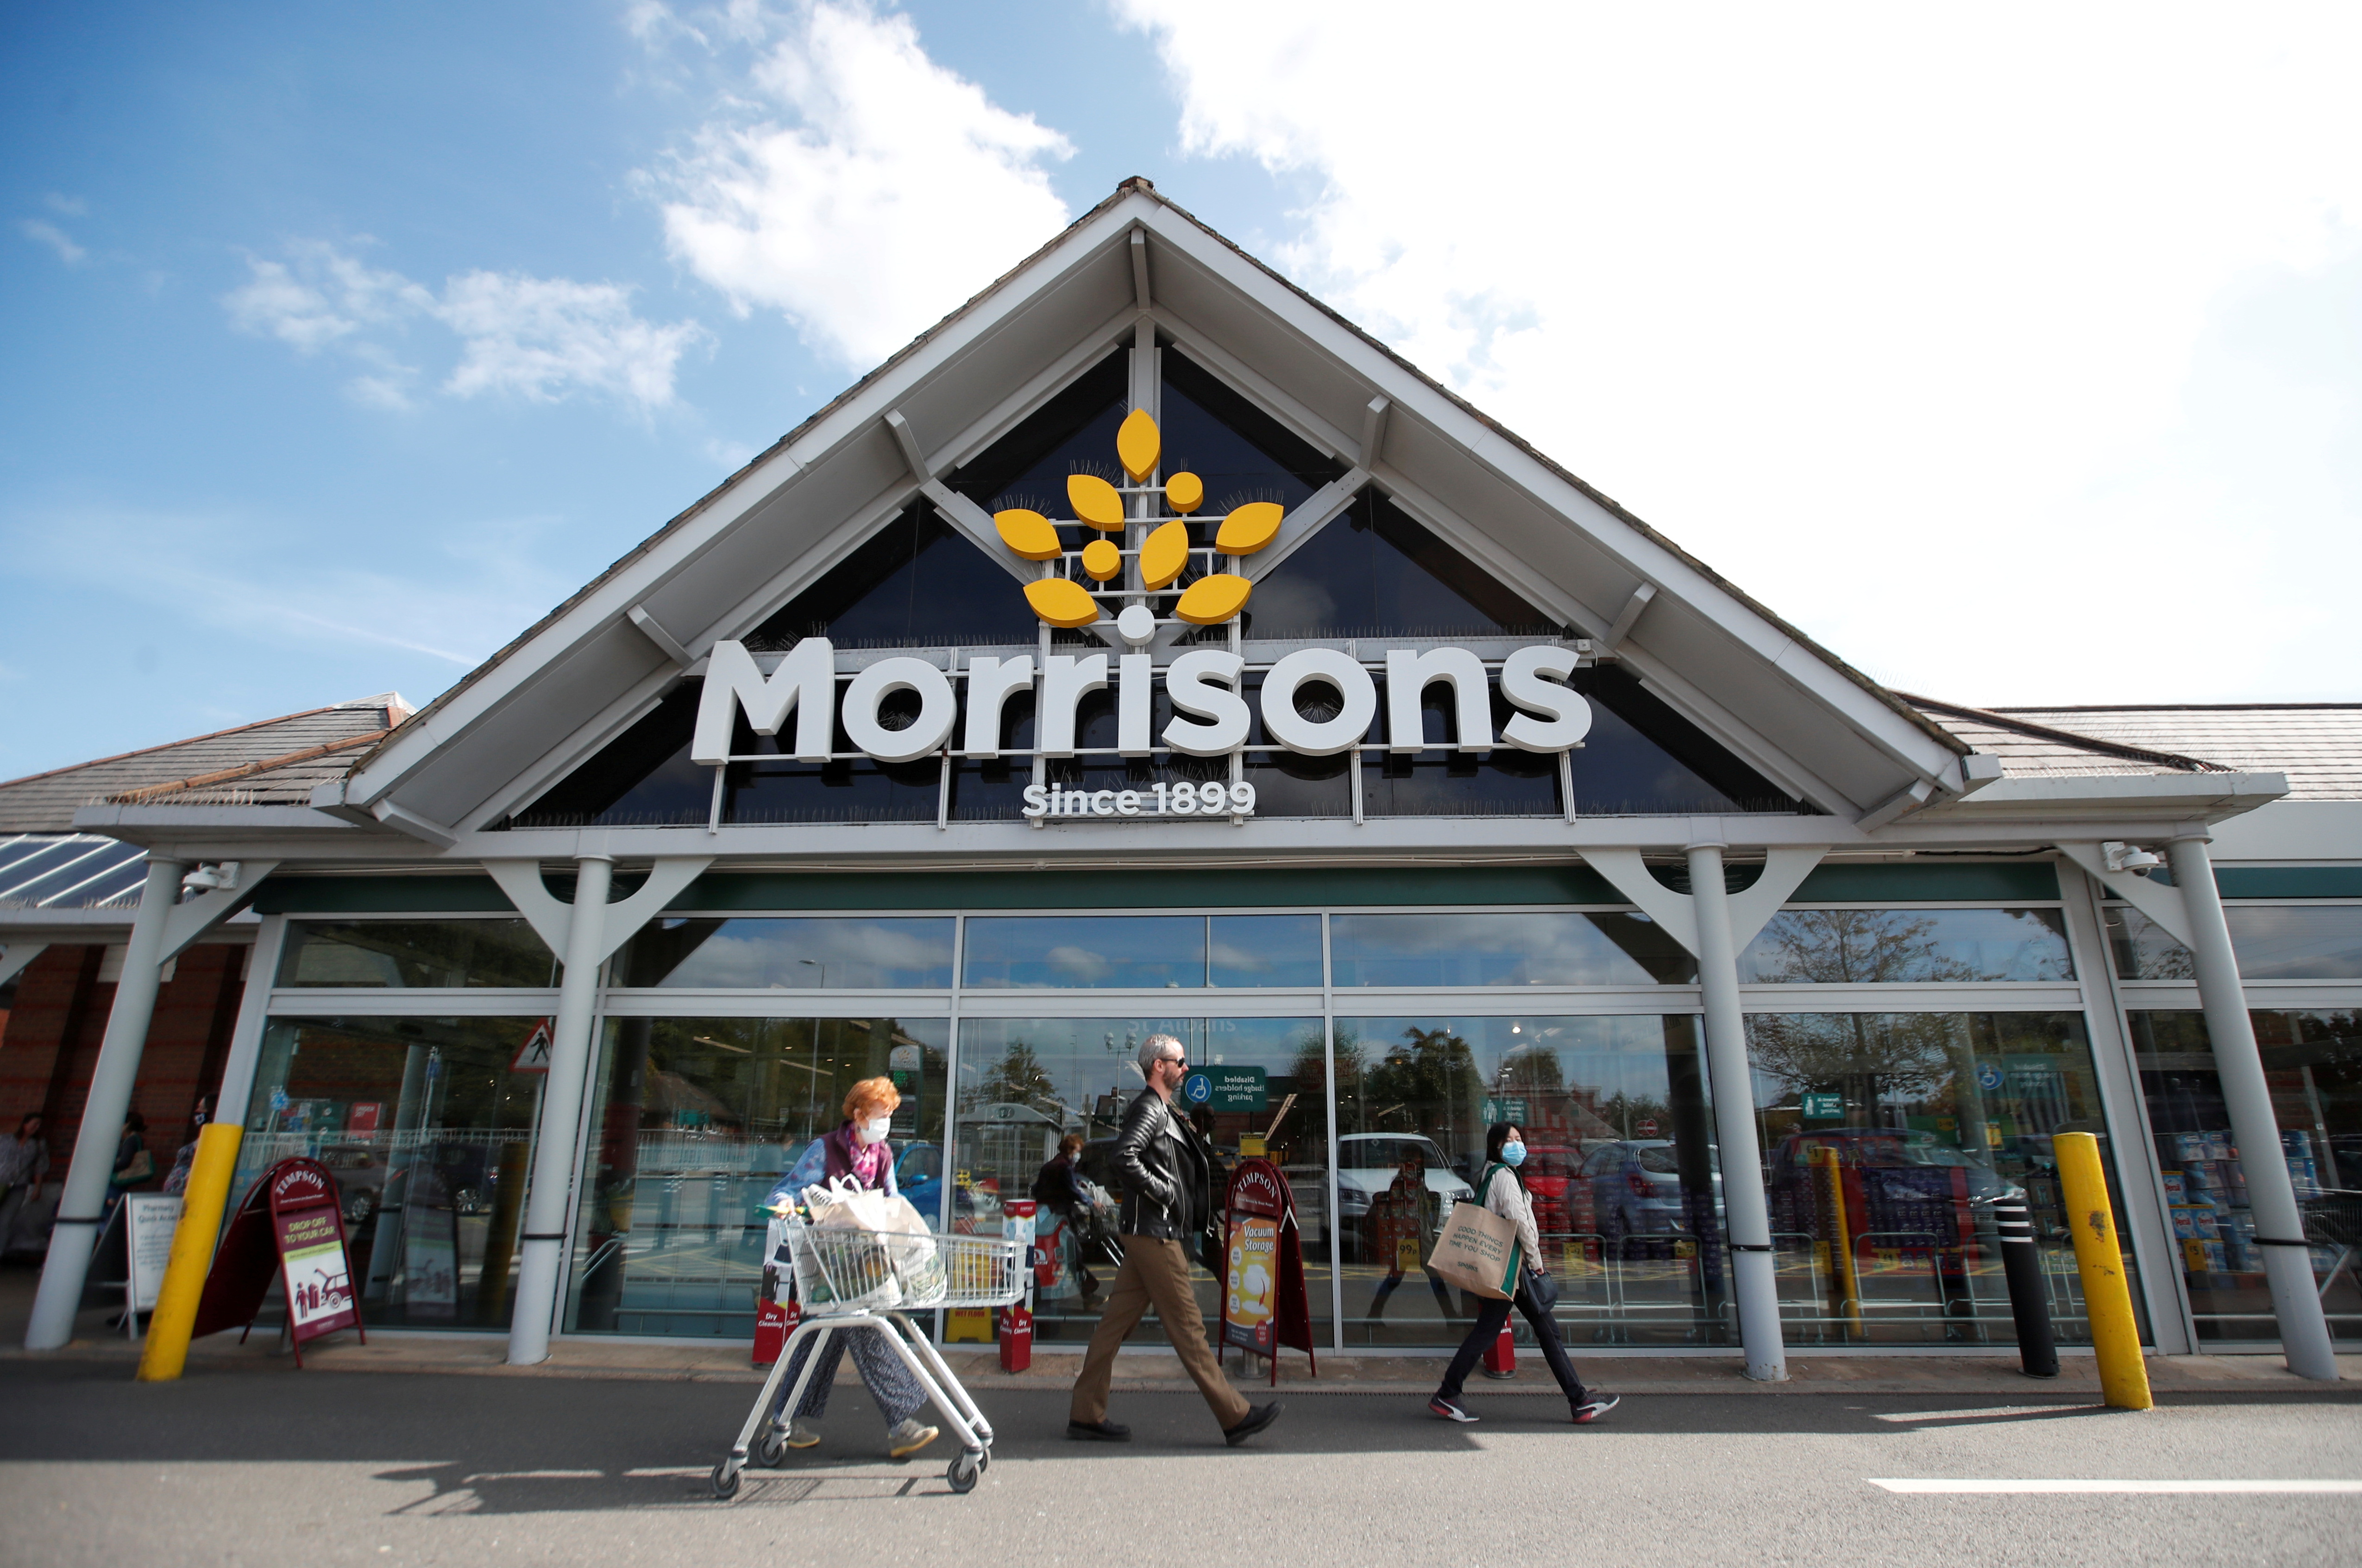 A Morrisons store is pictured in St Albans, Britain, September 10, 2020.  REUTERS/Peter Cziborra/File Photo